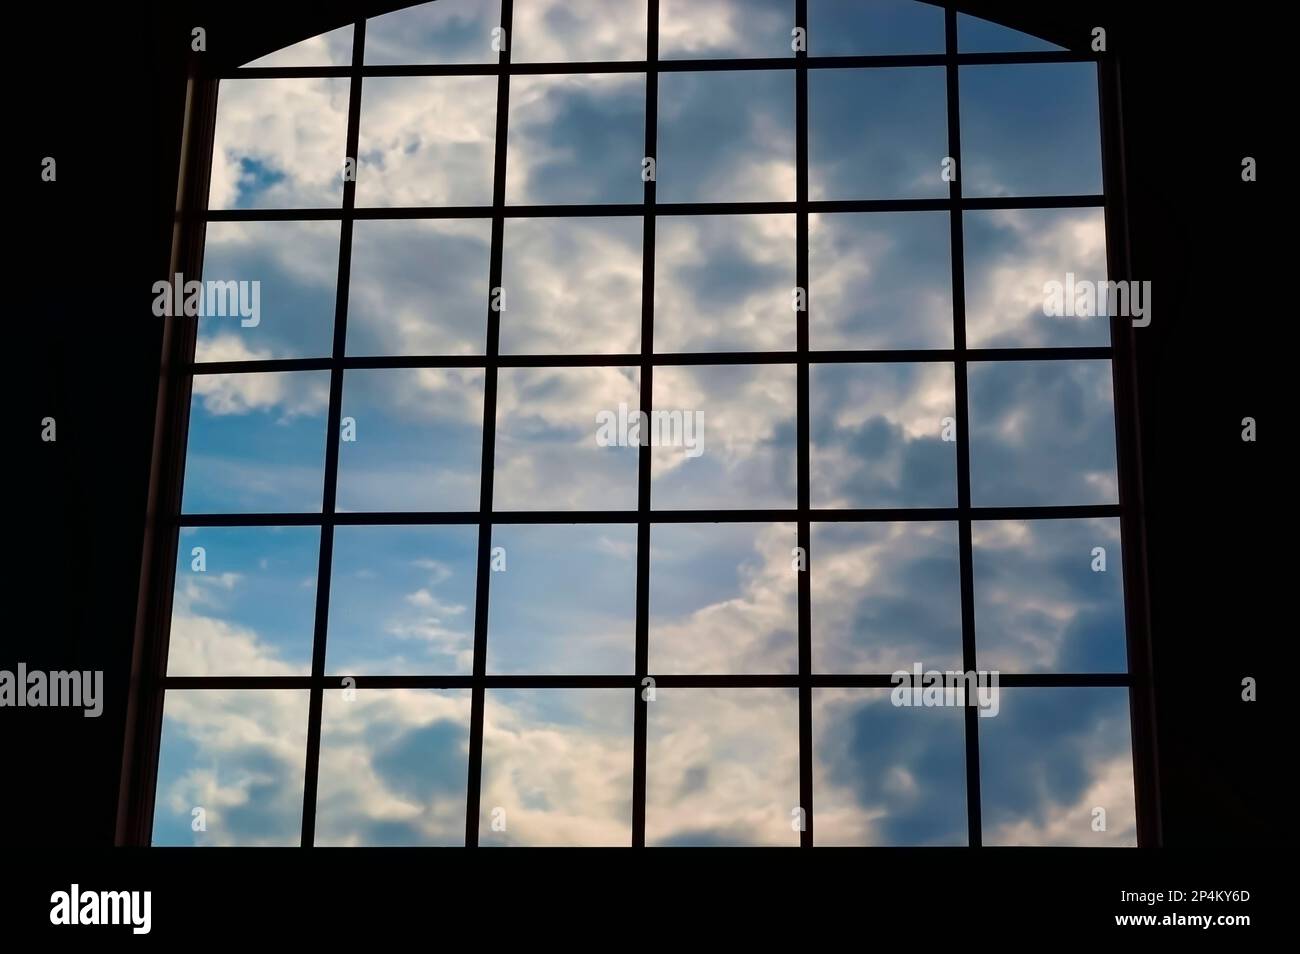 A view of the sky with clouds through a large window with numerous square panes. Stock Photo